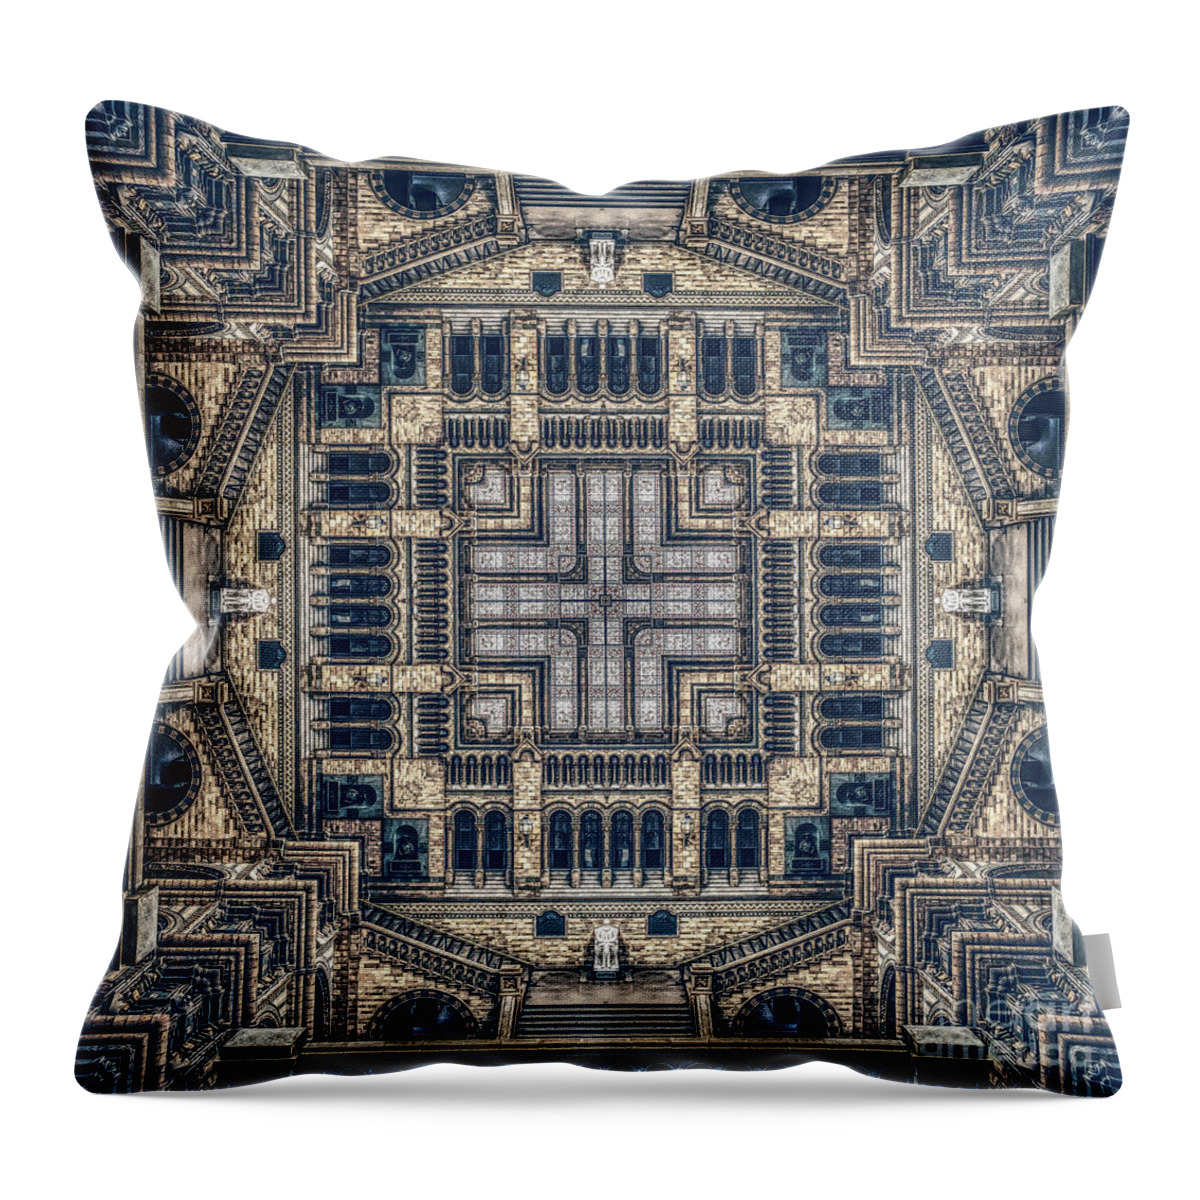 Architecture Throw Pillow featuring the digital art Improbable Architectural Structure by Phil Perkins